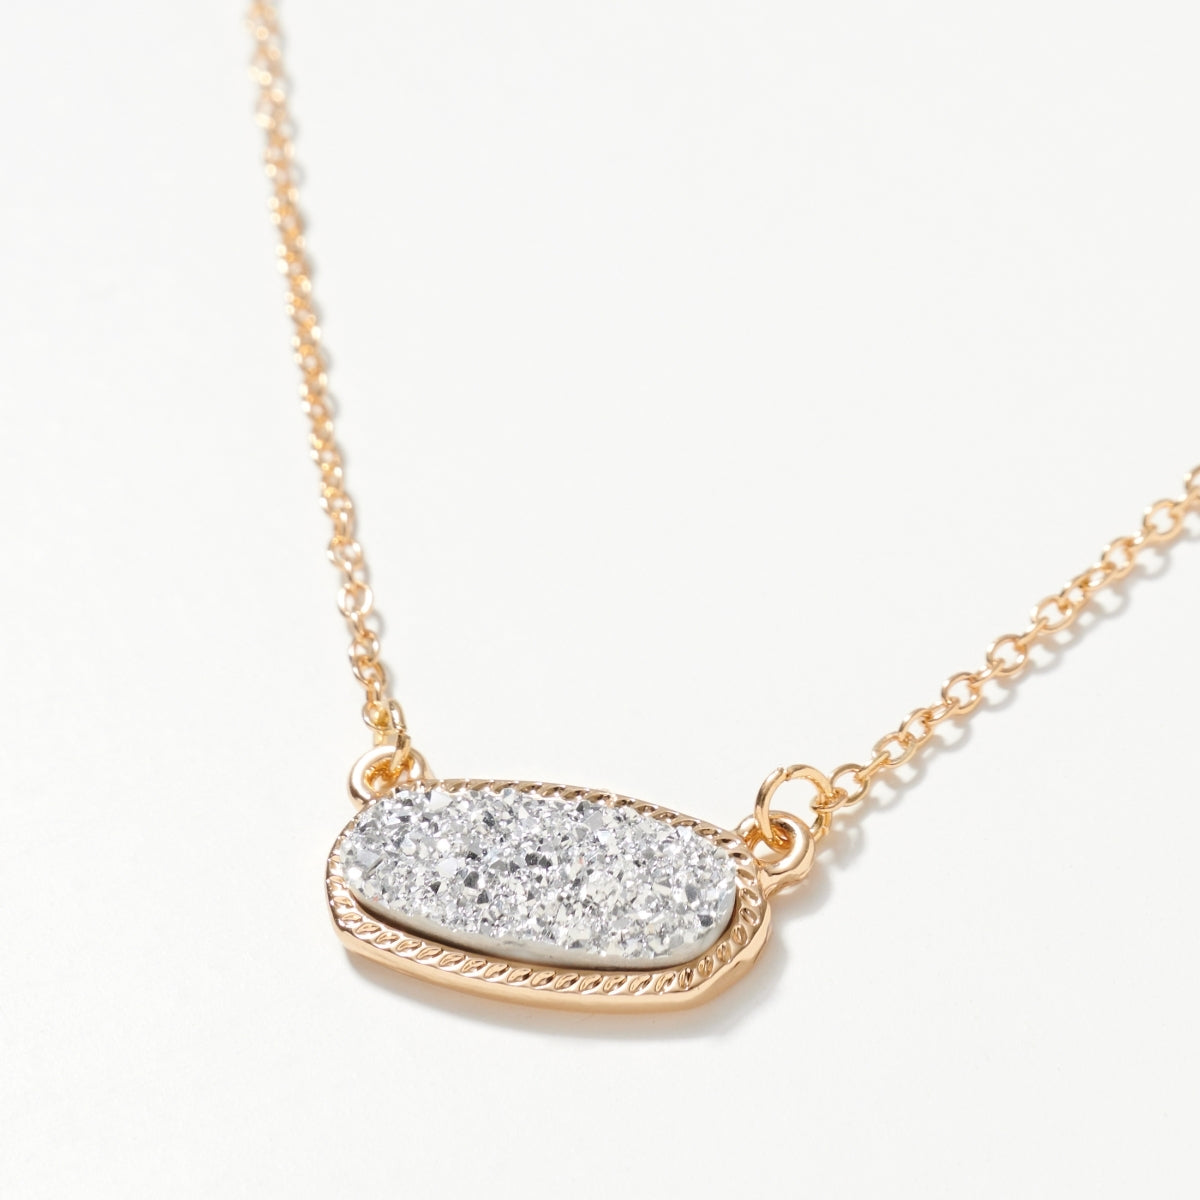 Dainty Oval Druzy Pendant Necklace & Earring Set - Silver on Gold